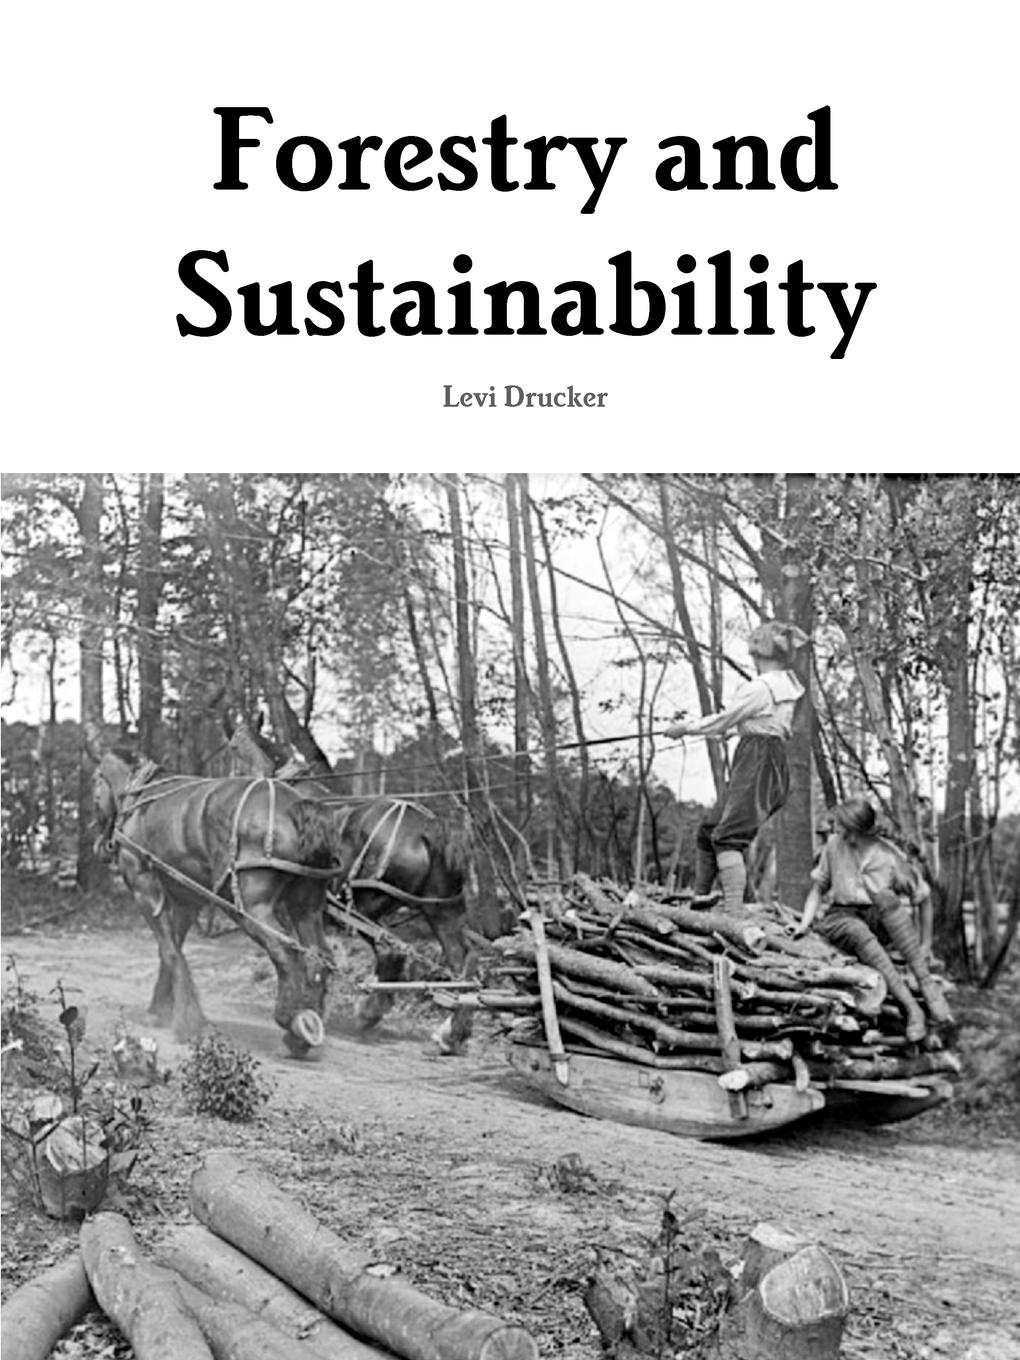 Forestry and Sustainability